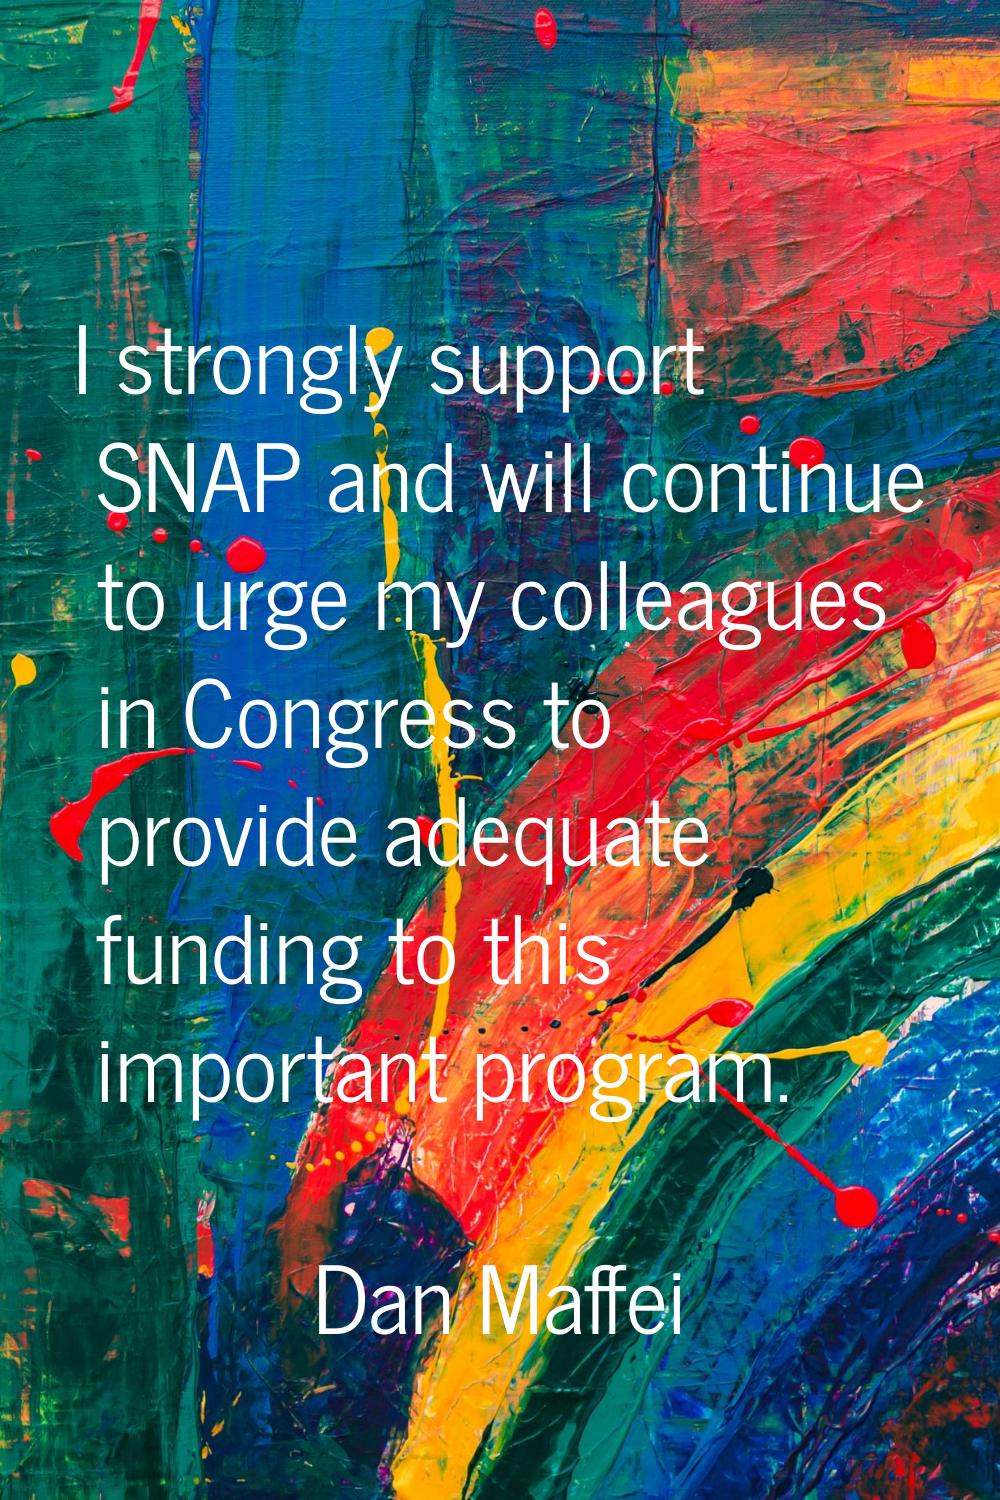 I strongly support SNAP and will continue to urge my colleagues in Congress to provide adequate fun